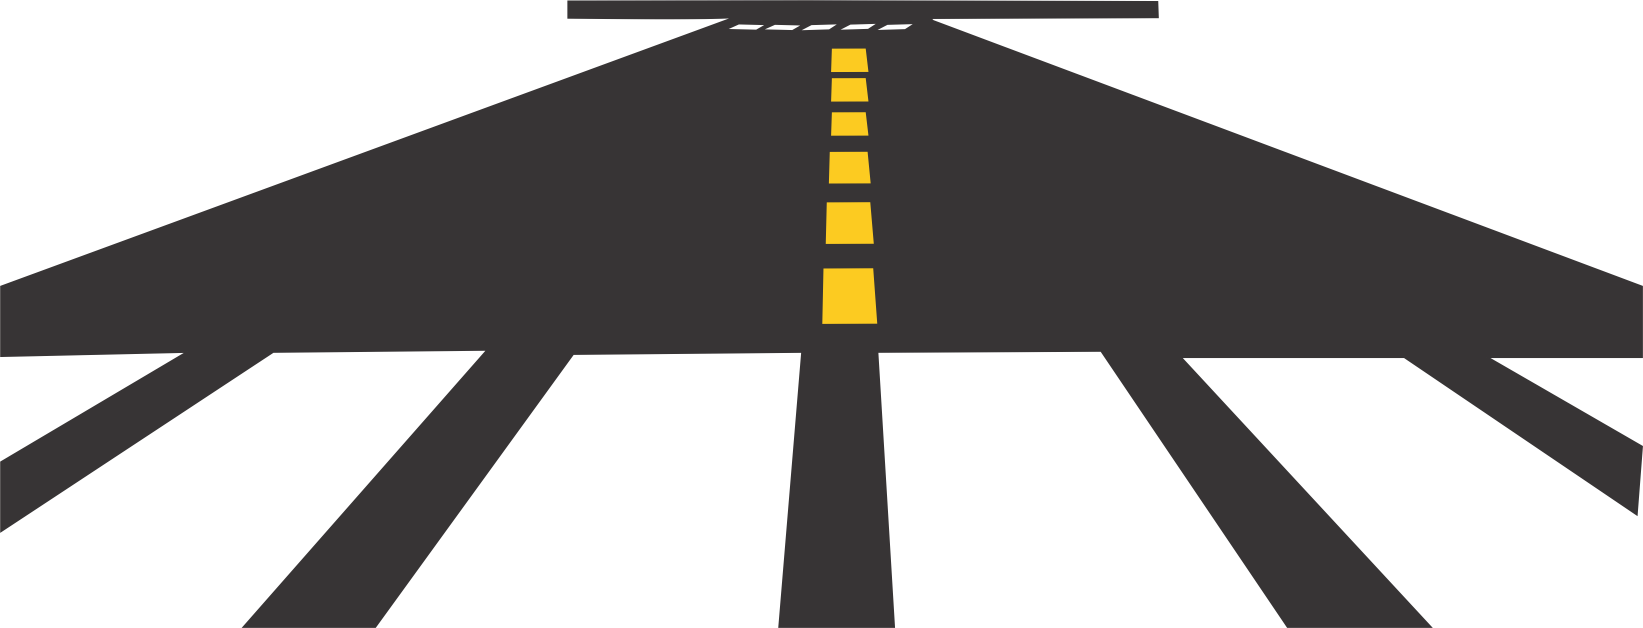 Highway clipart smooth road. High way png image